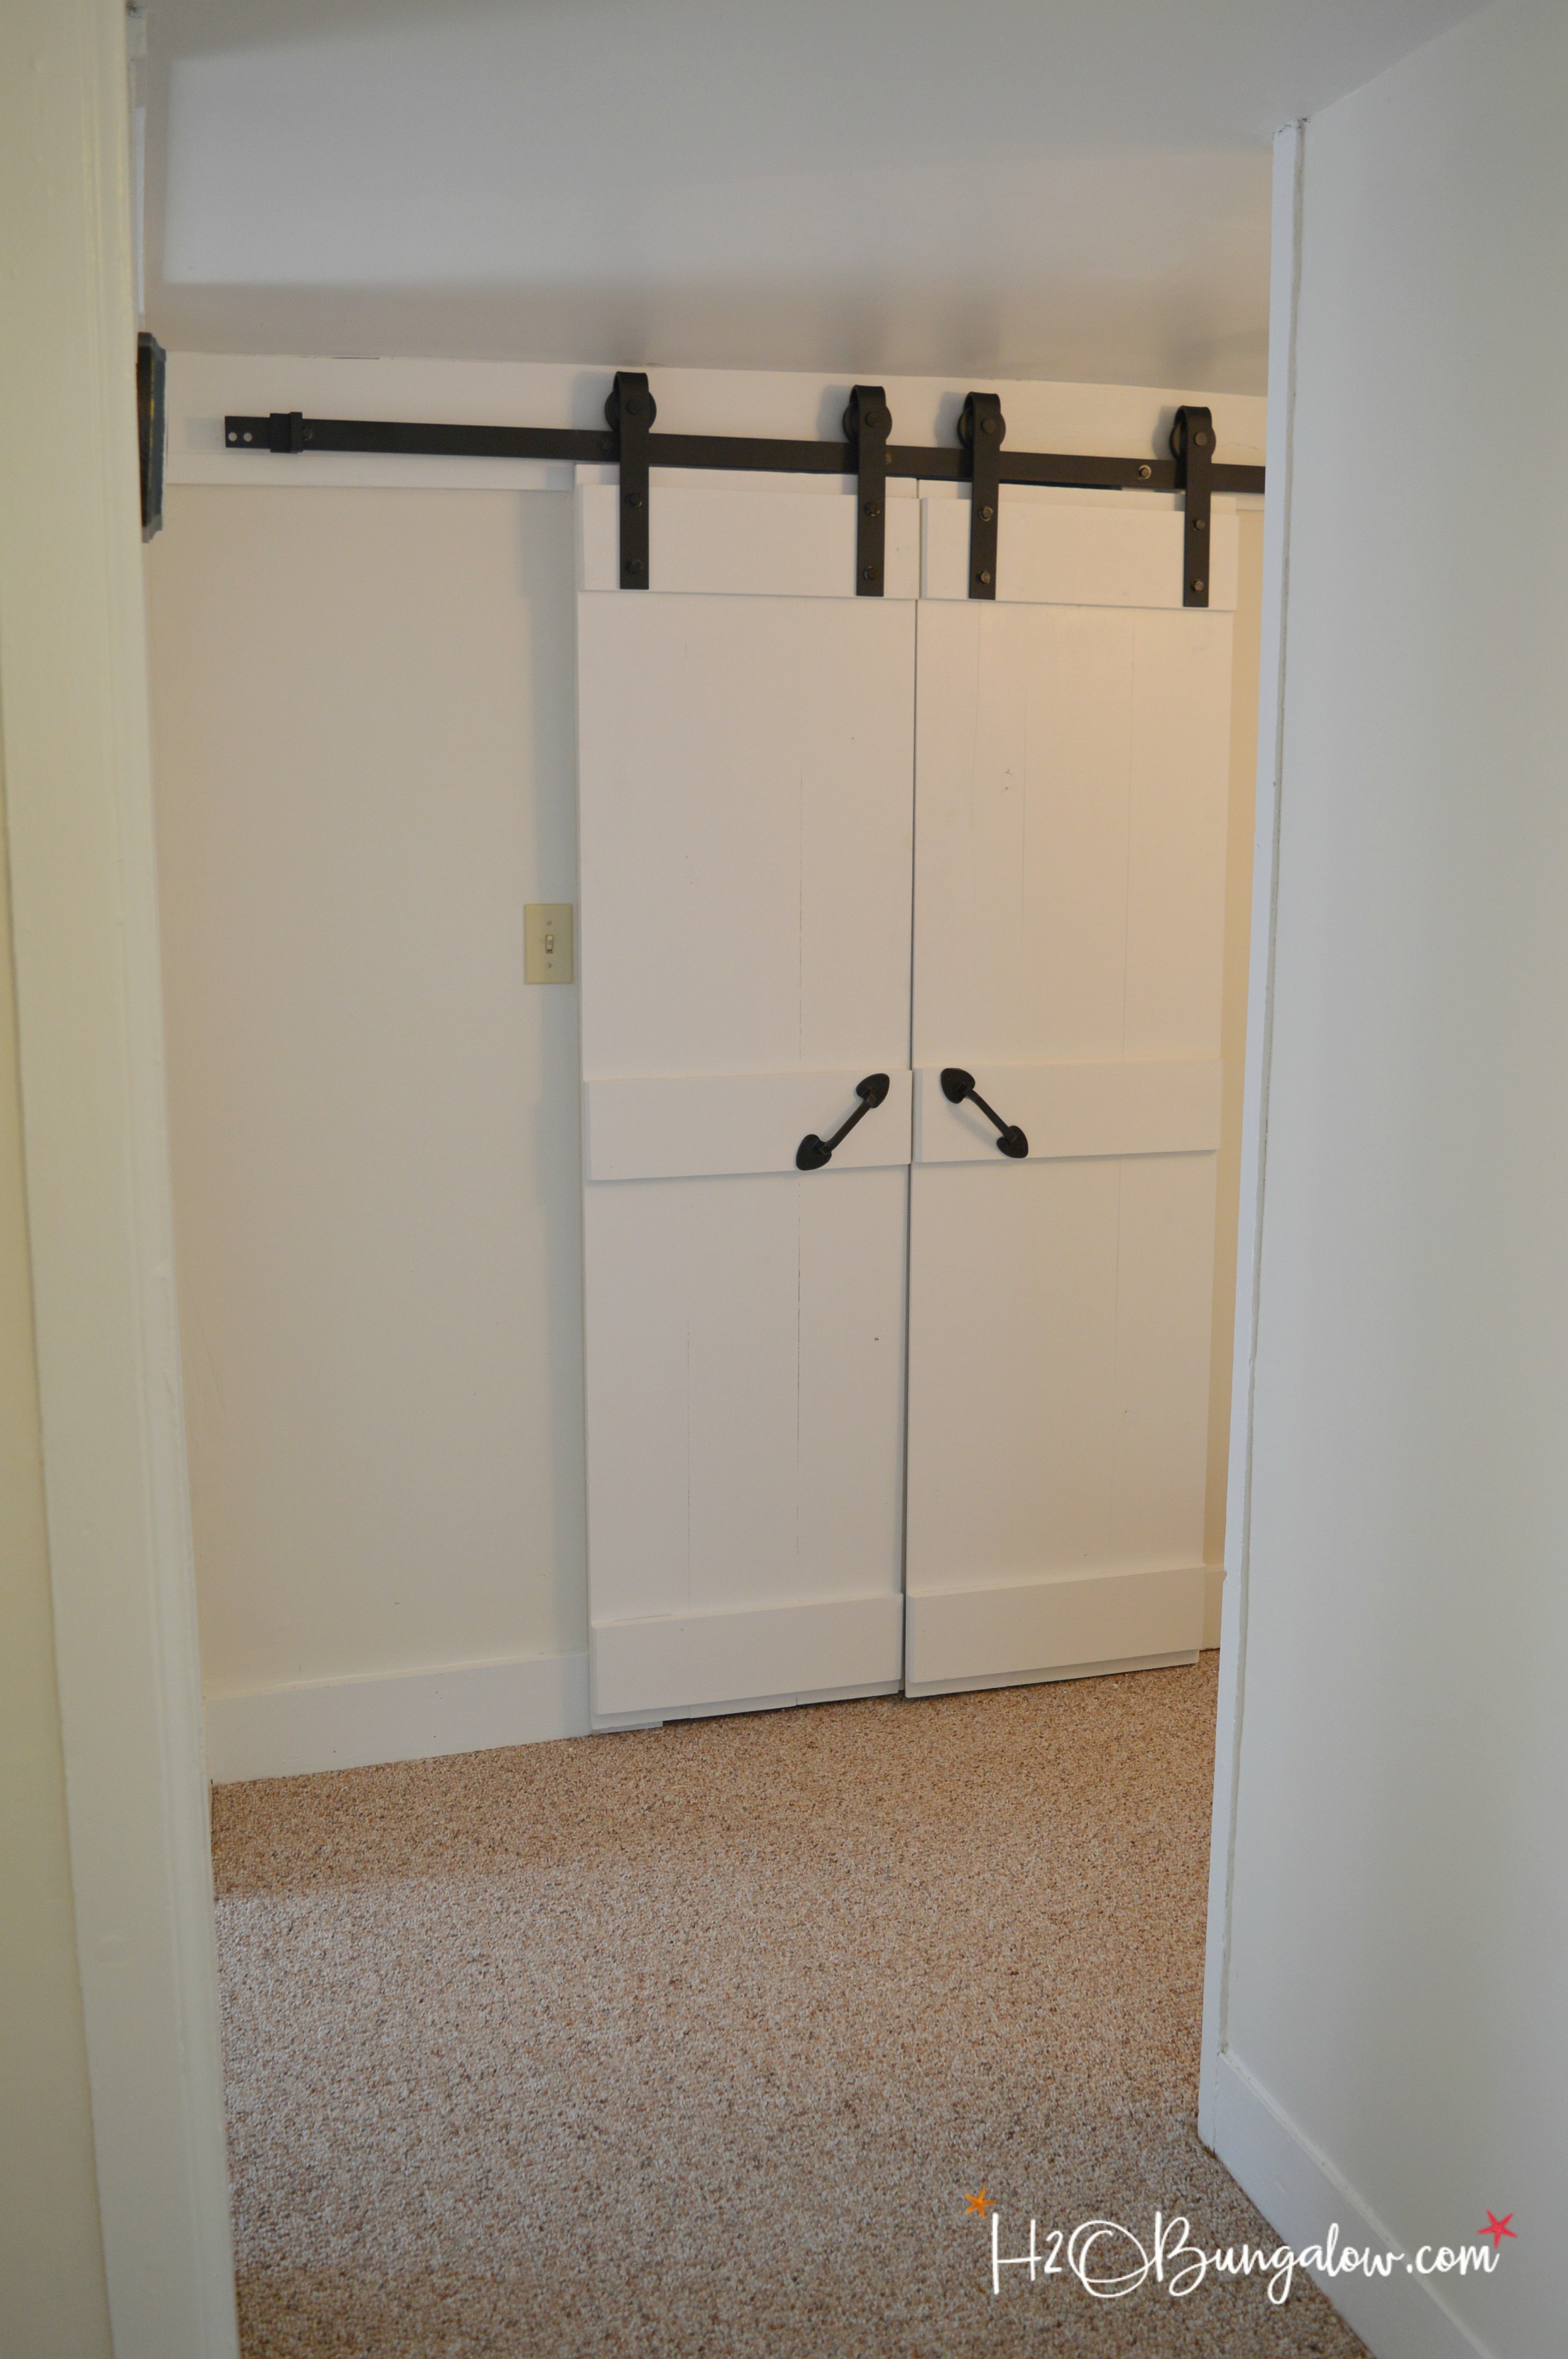 Easy DIY double barn door tutorial for interior sliding barn doors with a budget friendly resource for all sizes of barn door hardware. Make these in a day and update your home. Great for small spaces and bathrooms. 